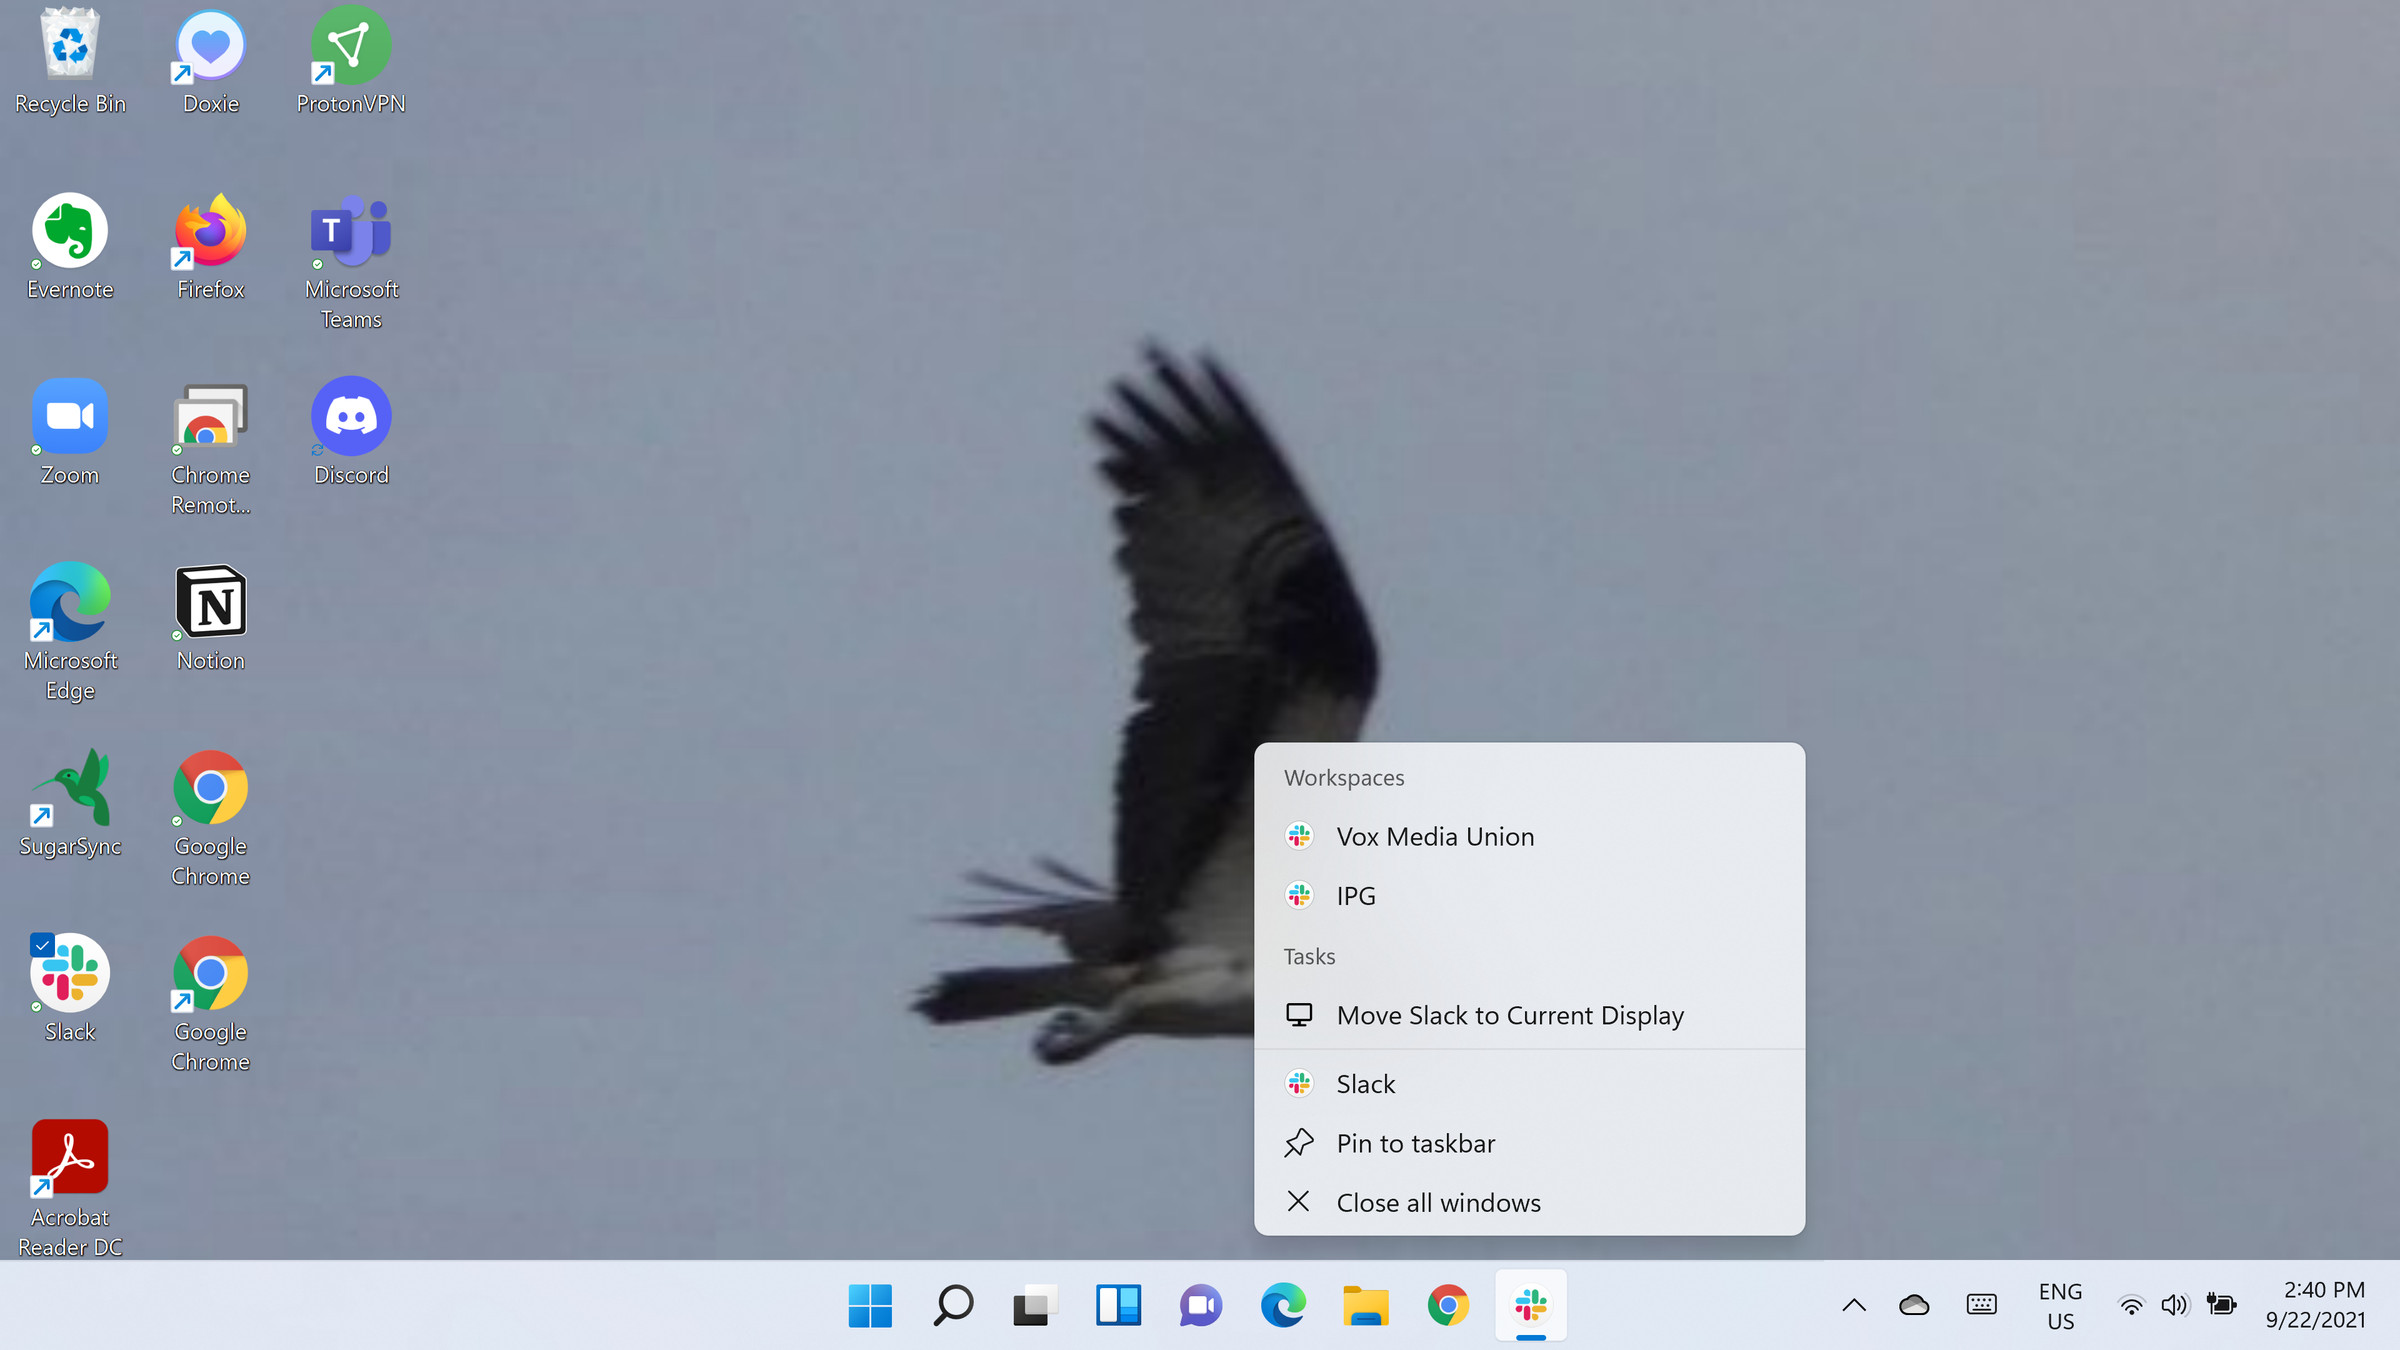 Right click on an active icon and select “Pin to taskbar”